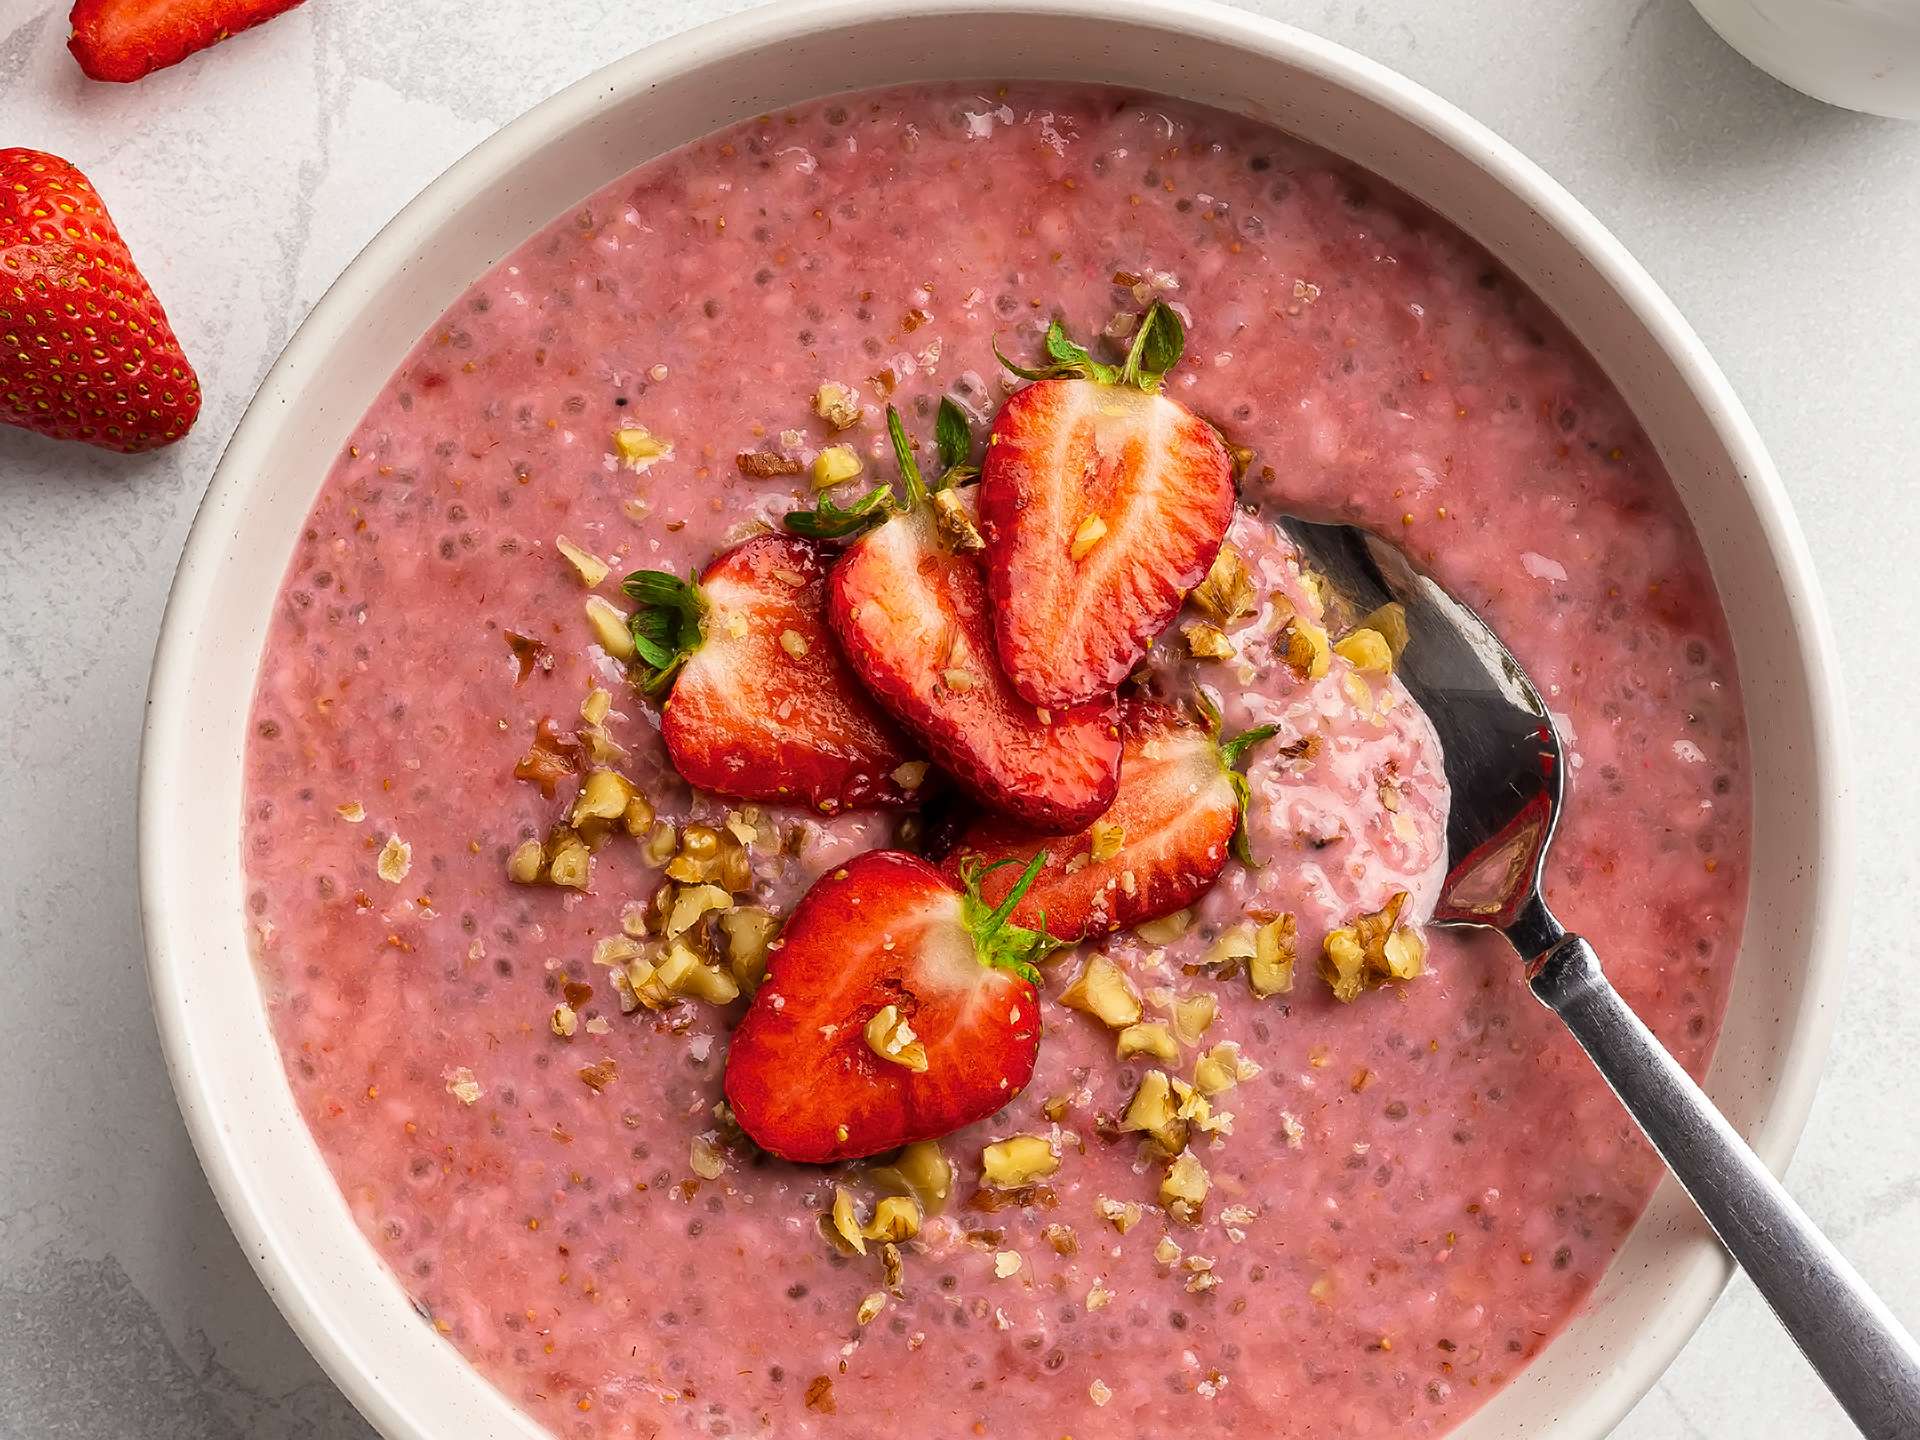 Low FODMAP Oatmeal with Strawberries